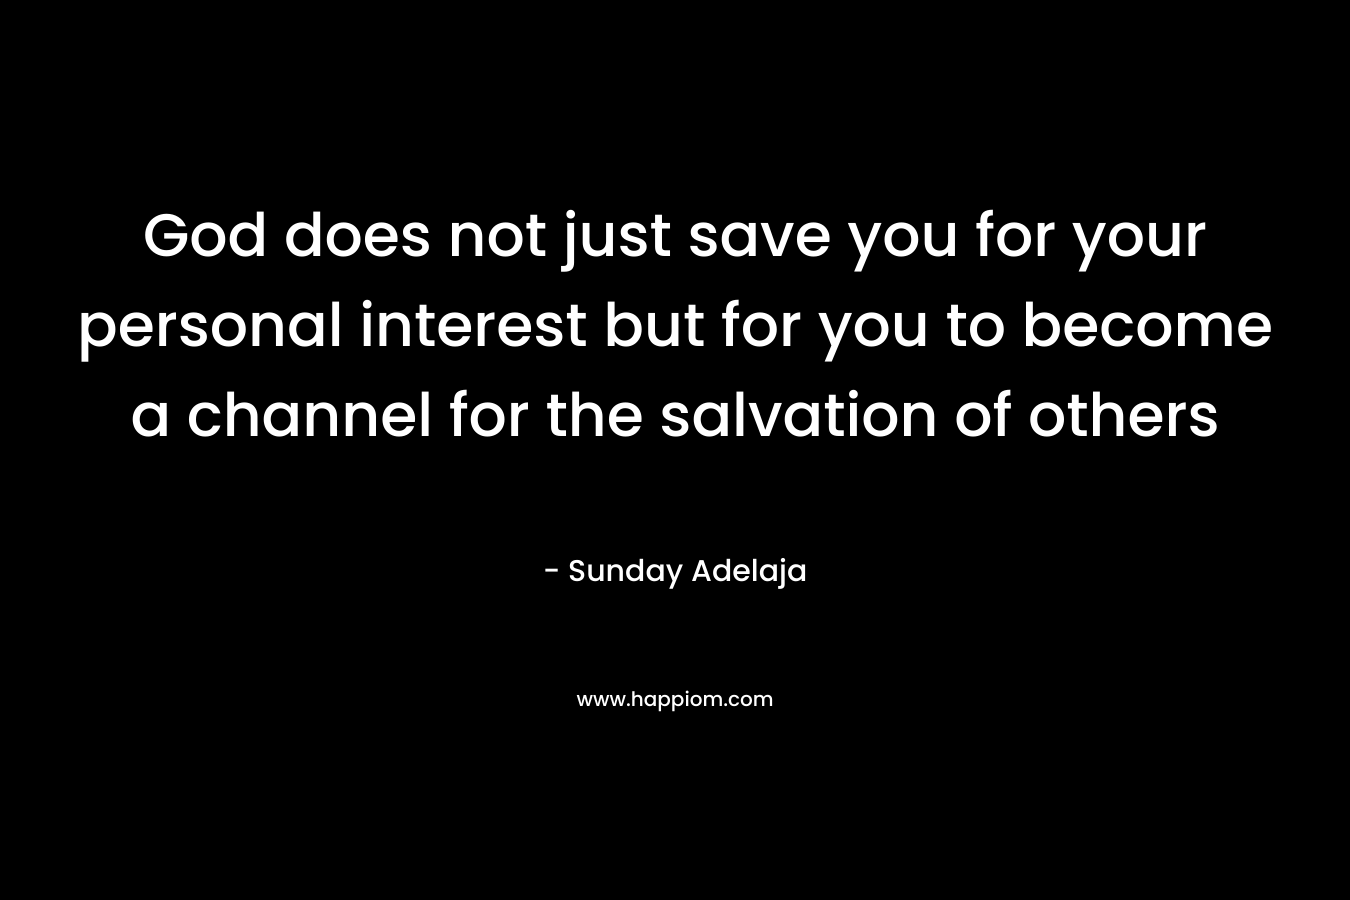 God does not just save you for your personal interest but for you to become a channel for the salvation of others